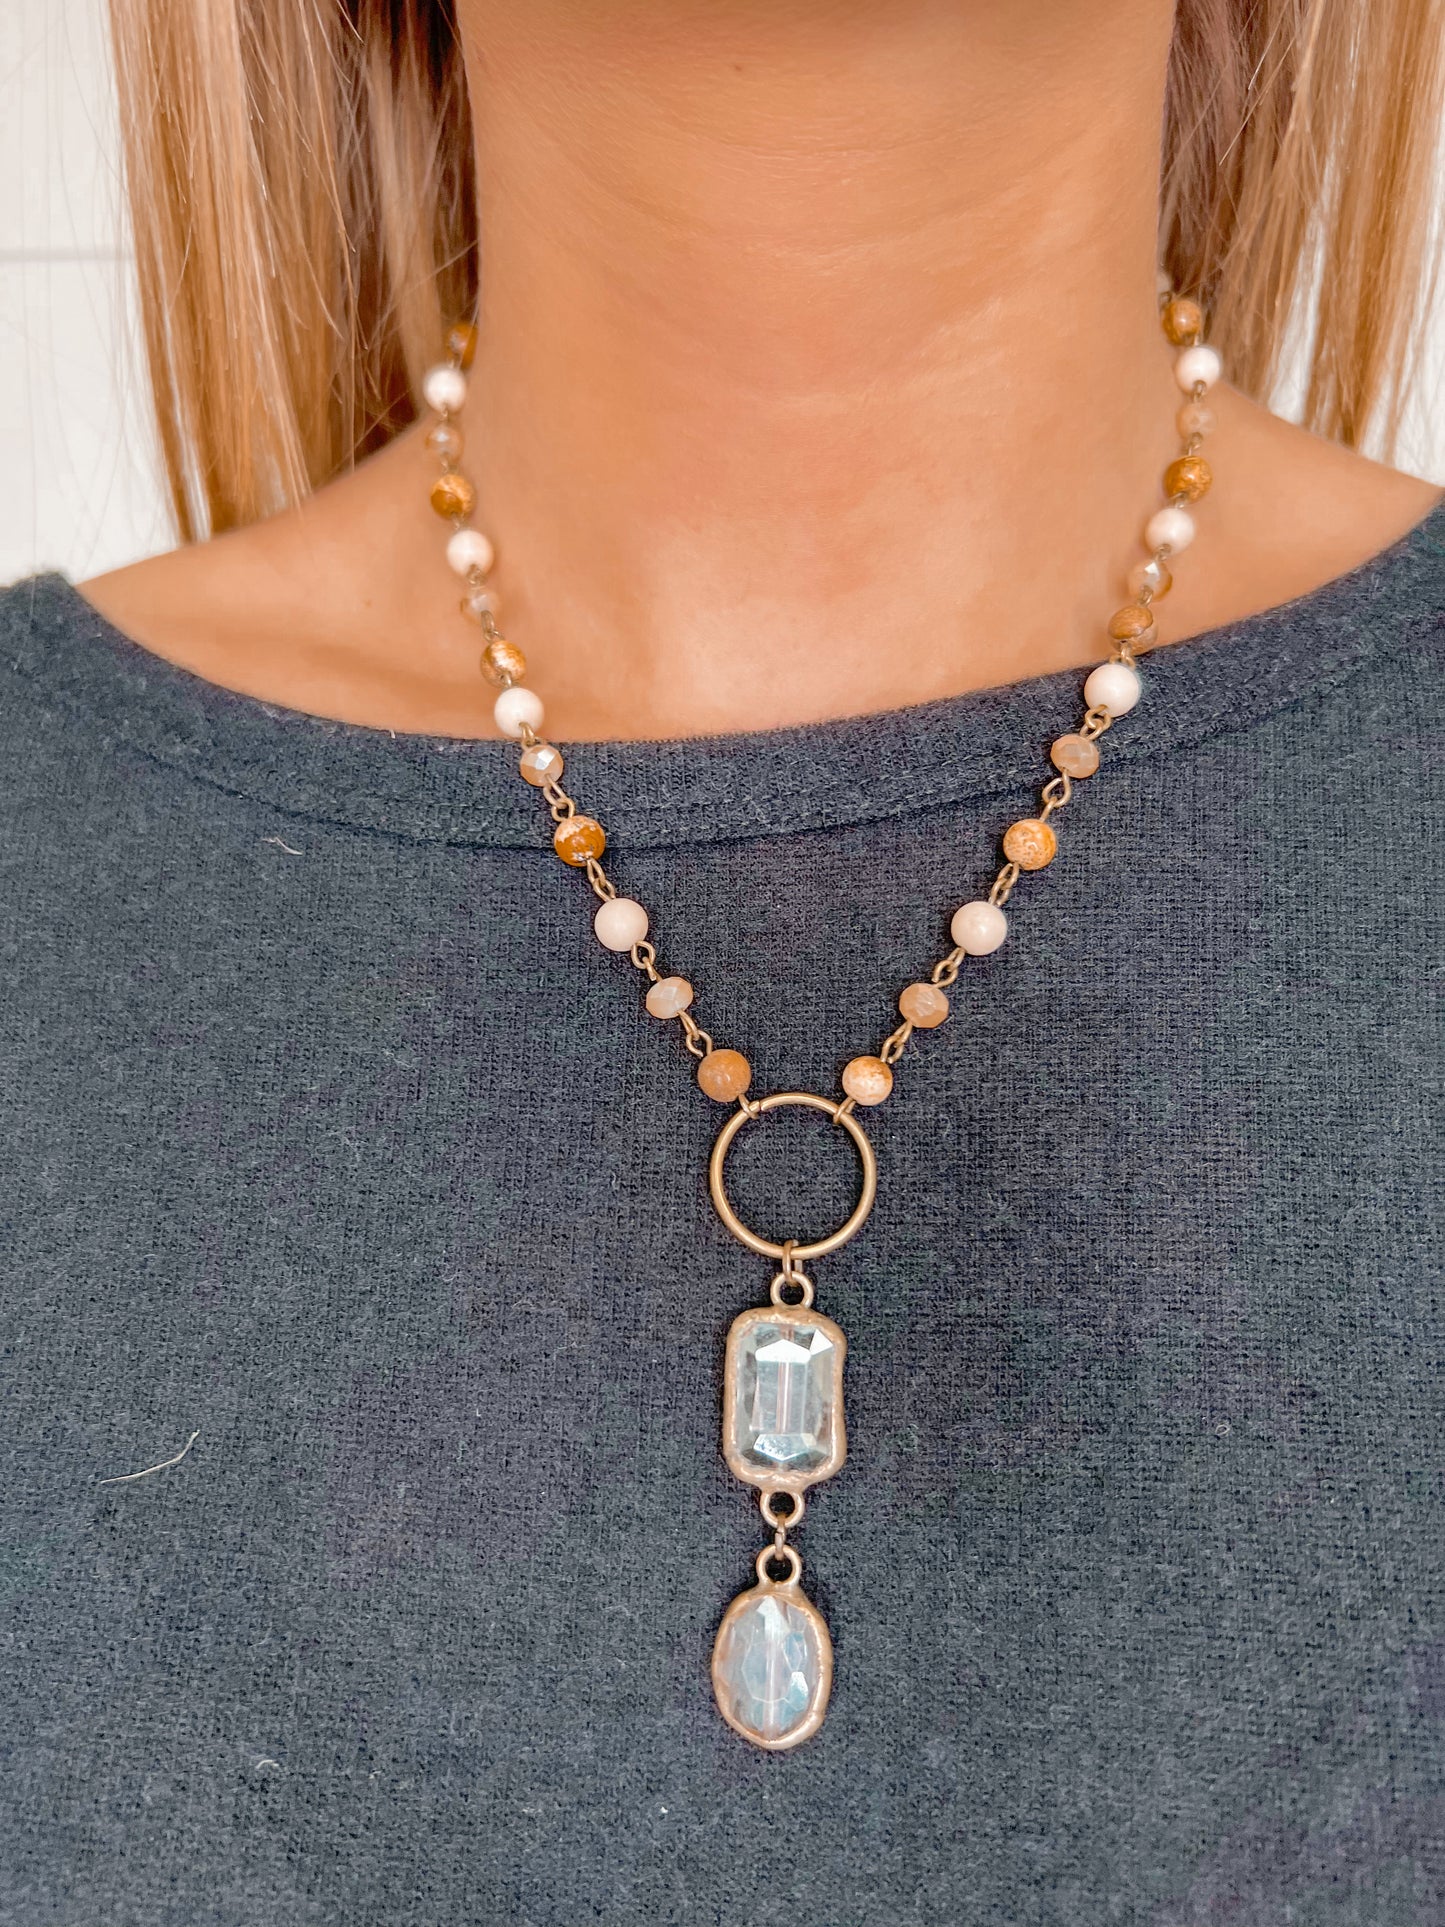 Antique Gold & Nude Crystal Bead Short Necklace with Rectangle & Oval Drop Pendant-Necklace-OMO Jewelry-NE350MC101-The Twisted Chandelier